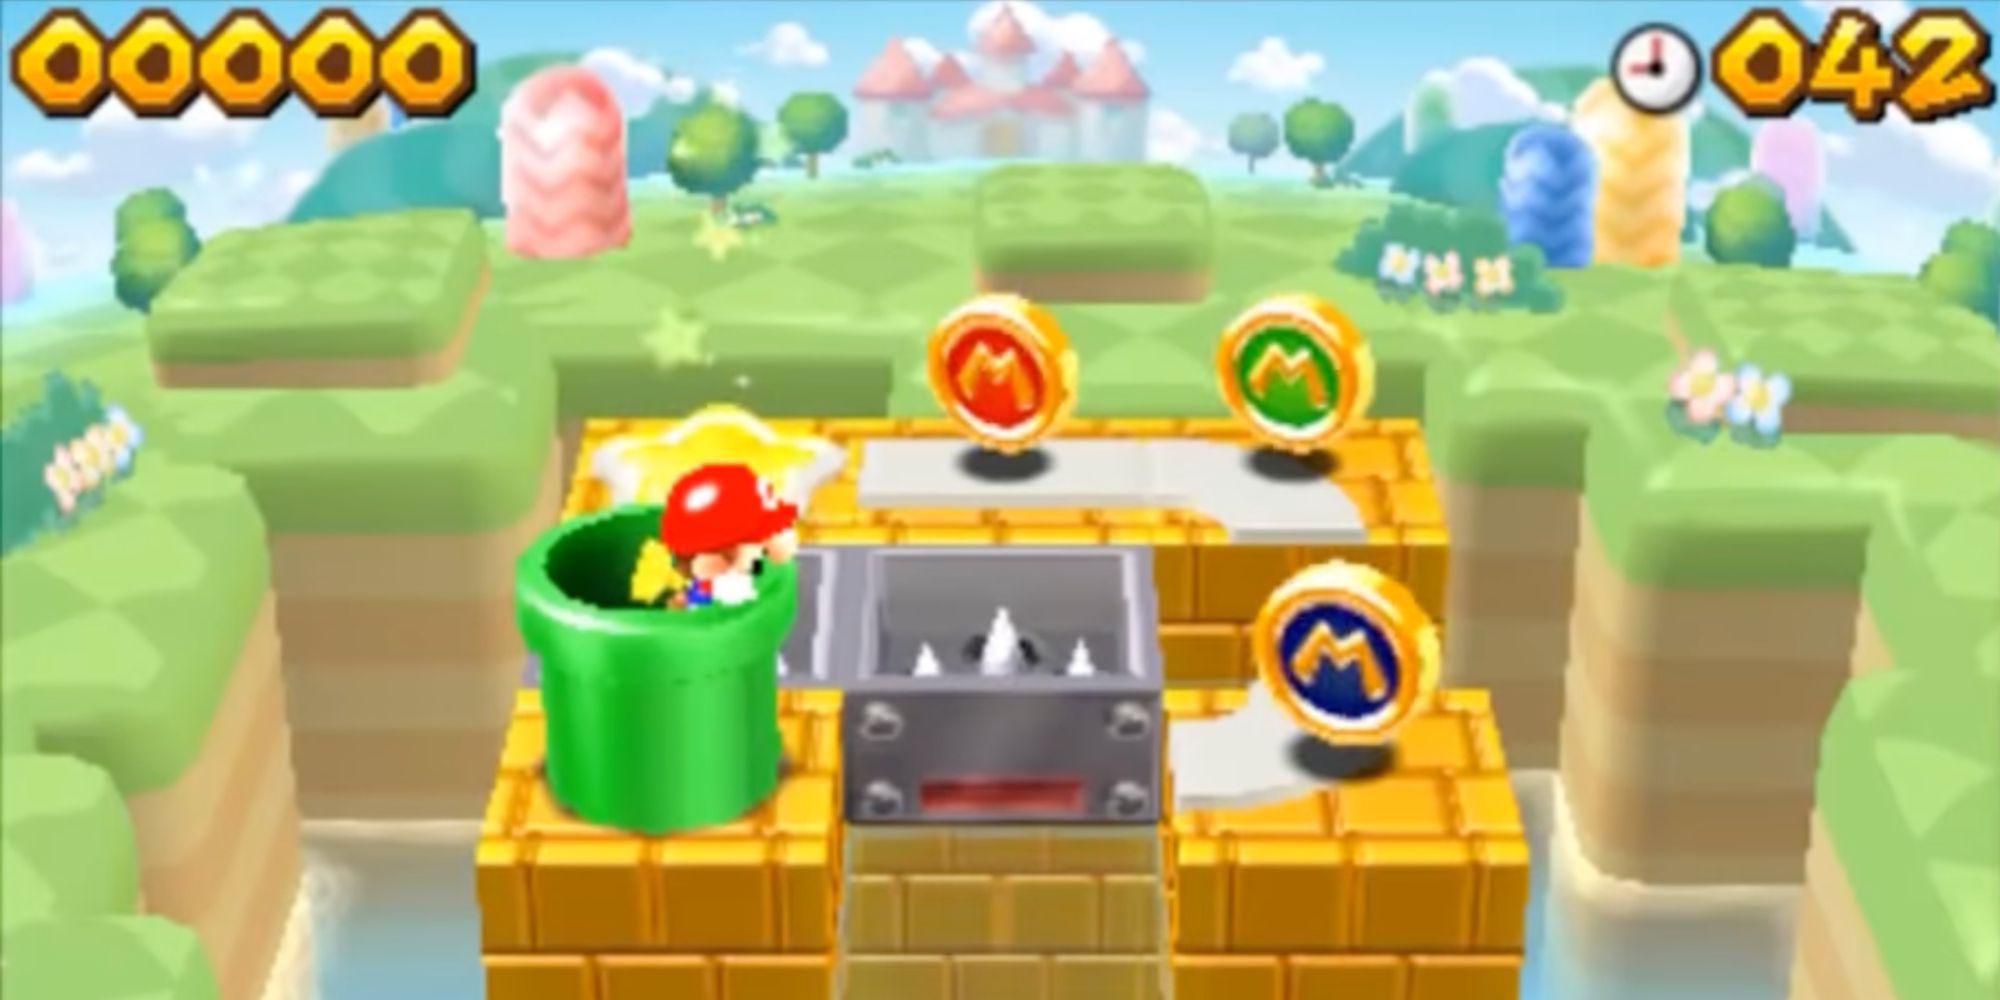 A screenshot from Mario And Donkey Kong: Minis On The Move, showing a mini-Mario doll pondering an obstacle course